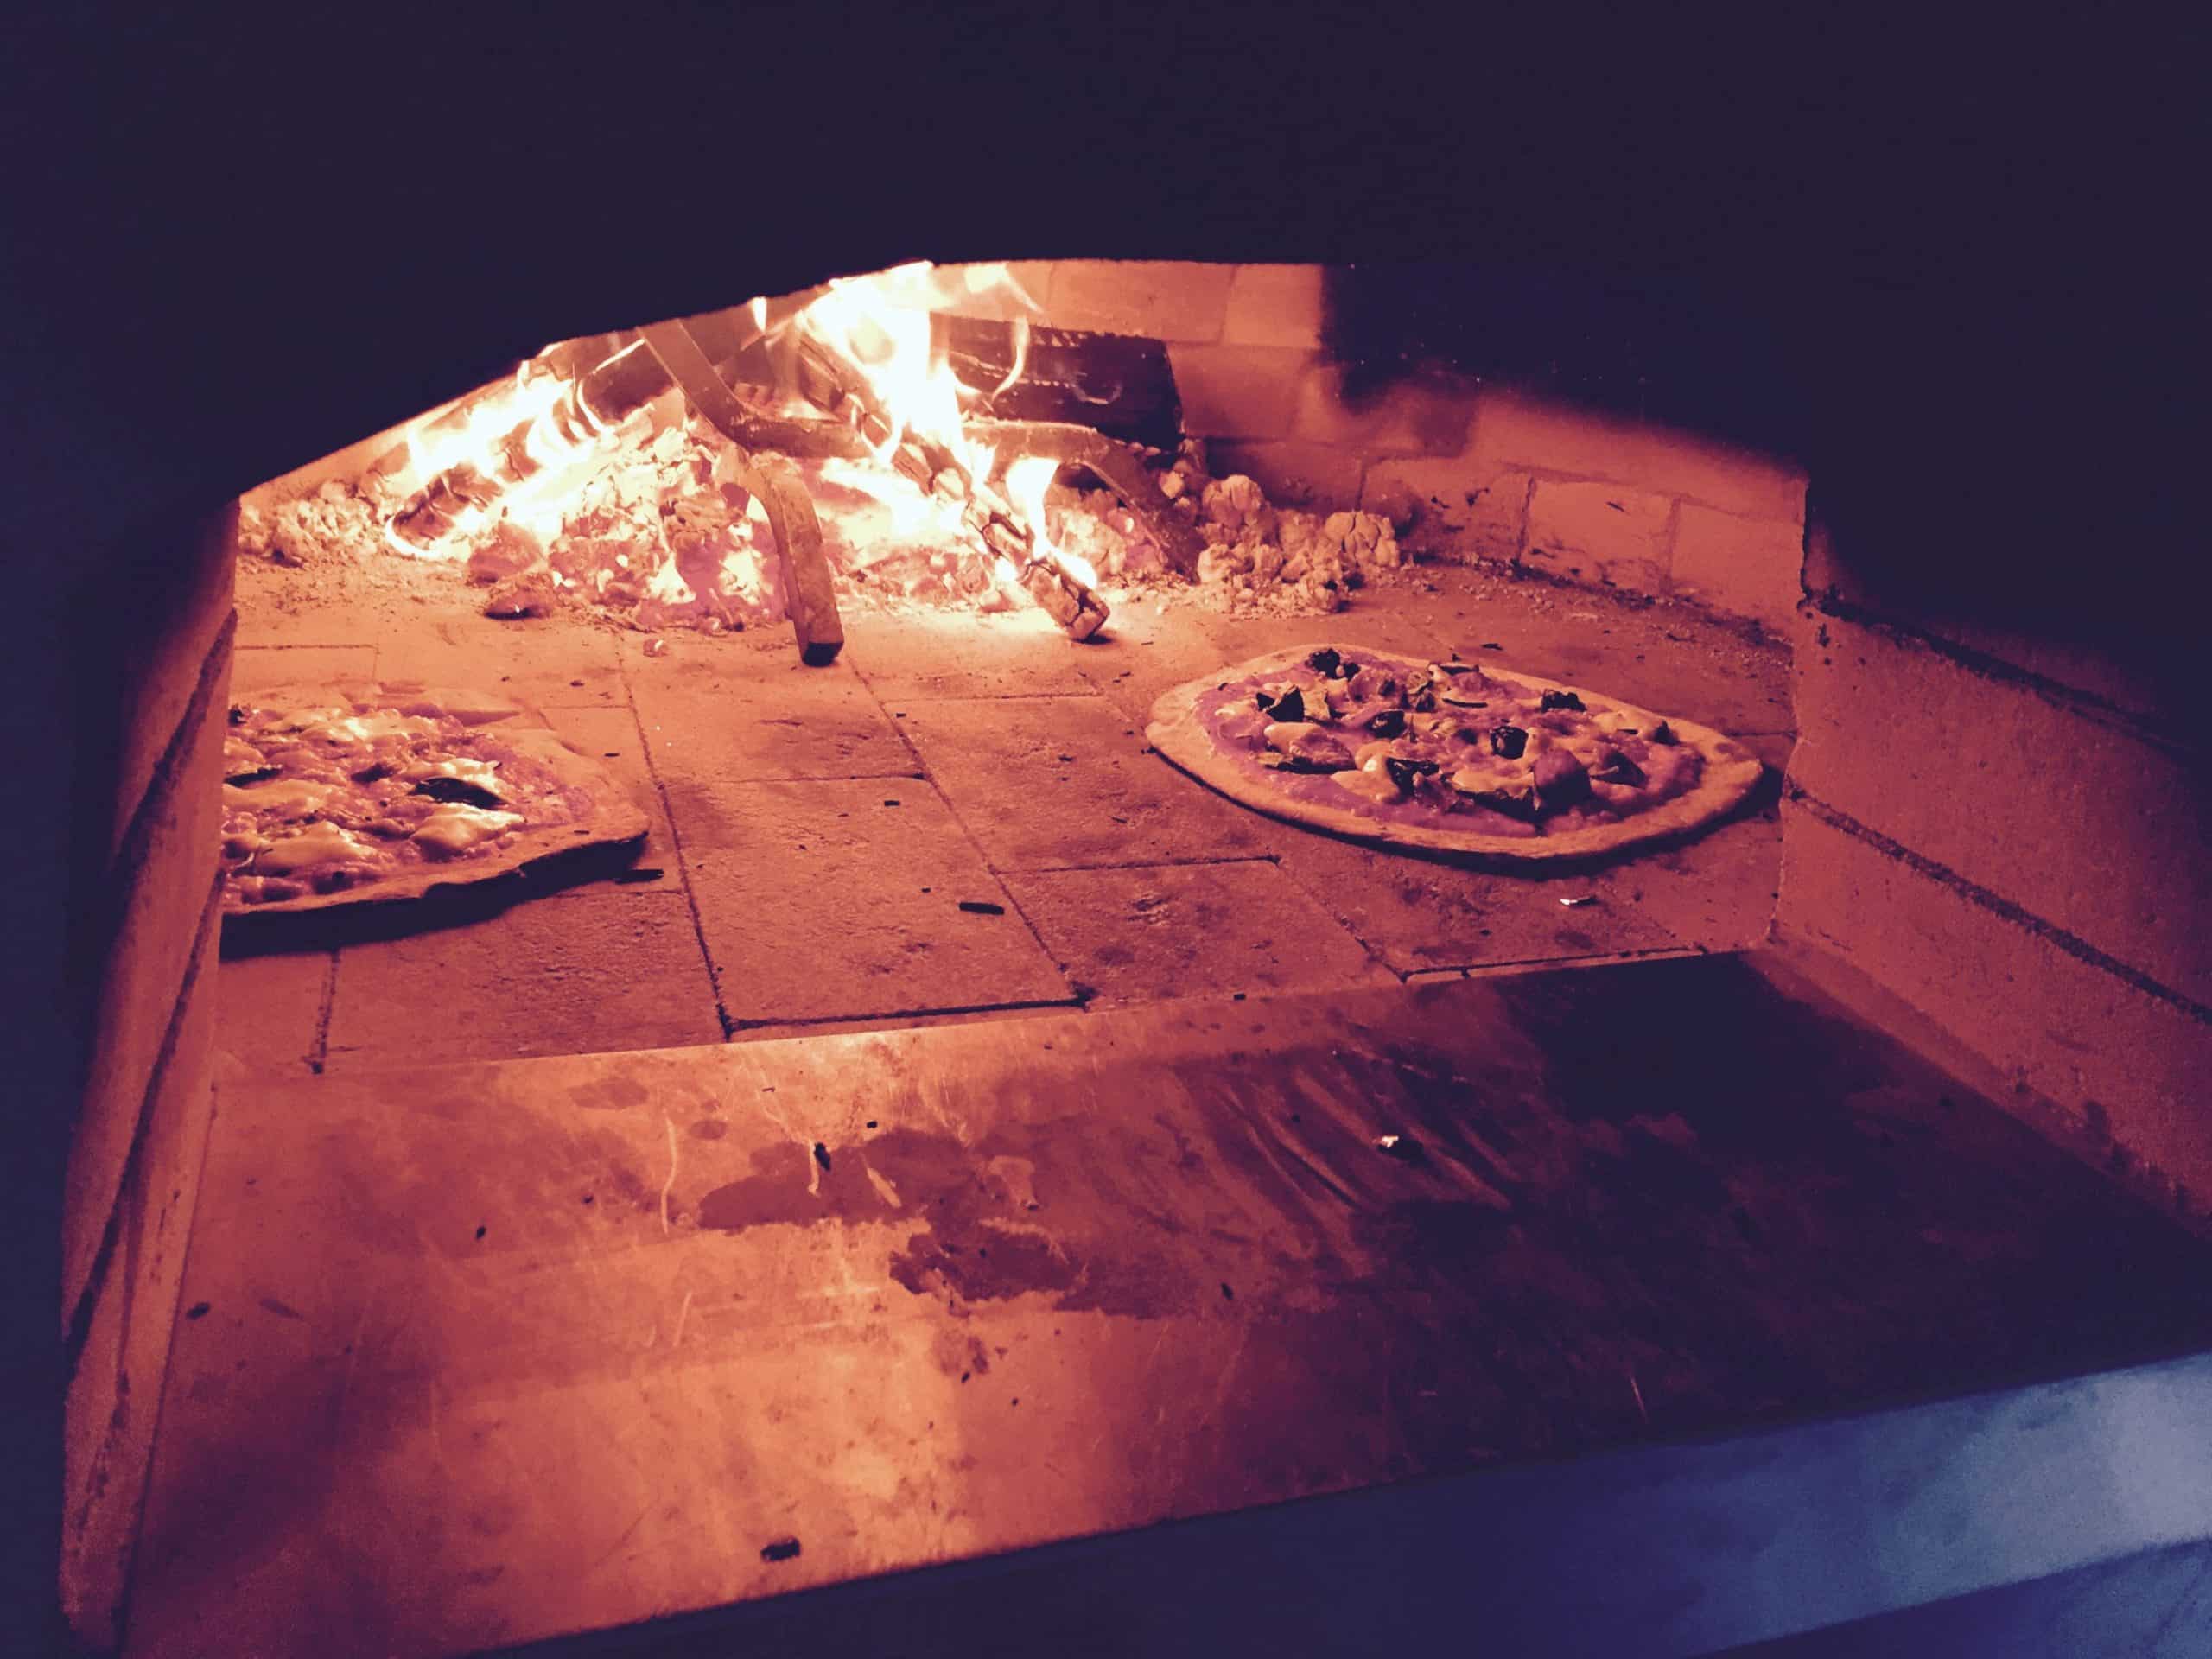 Groundlings Wood Fired Pizza